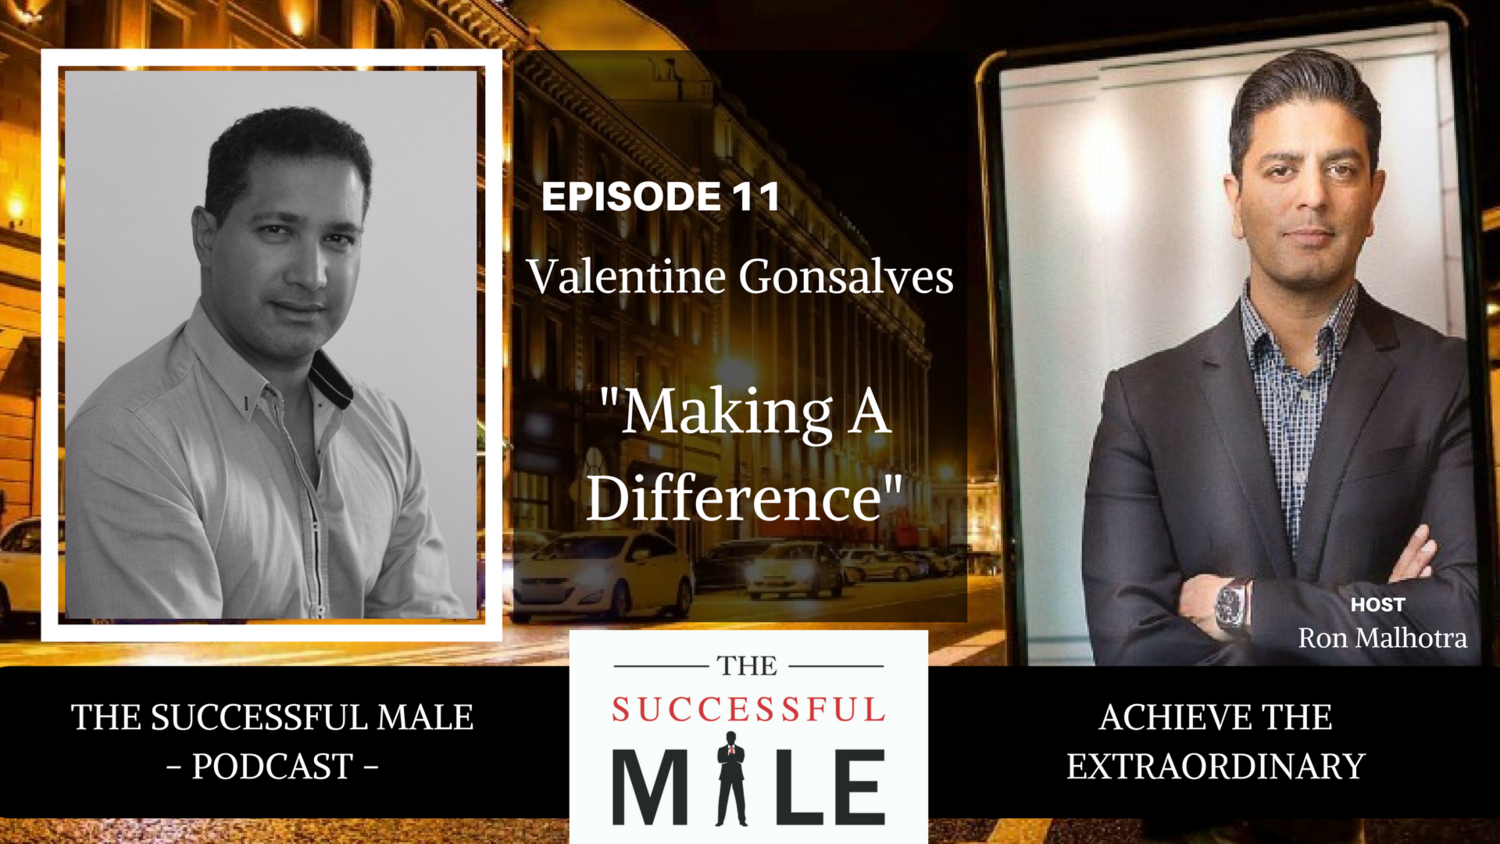 Making A Difference with Valentine Gonsalves